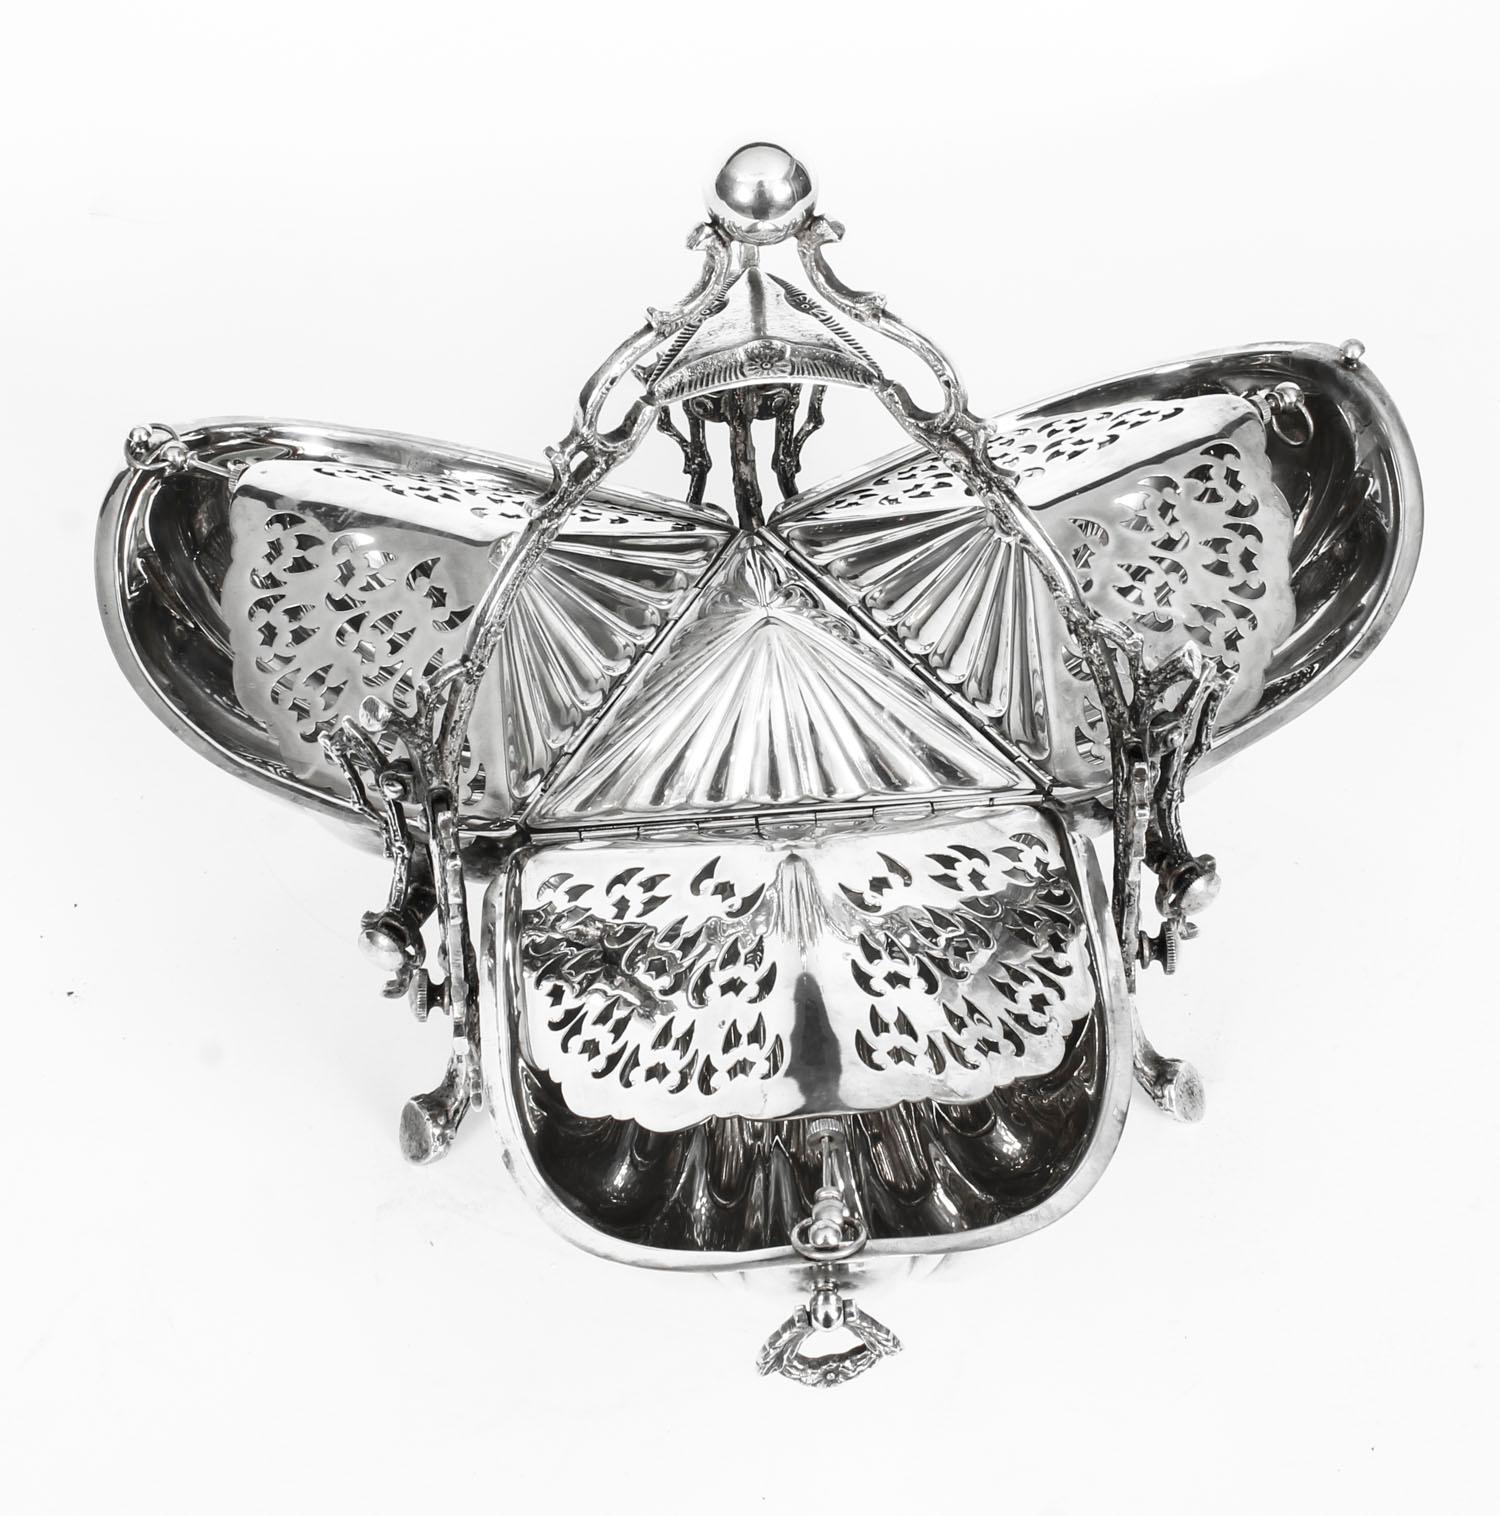 Antique Silver Plate Triple Shell Shaped Sweets Biscuit Box, 19th Century 12